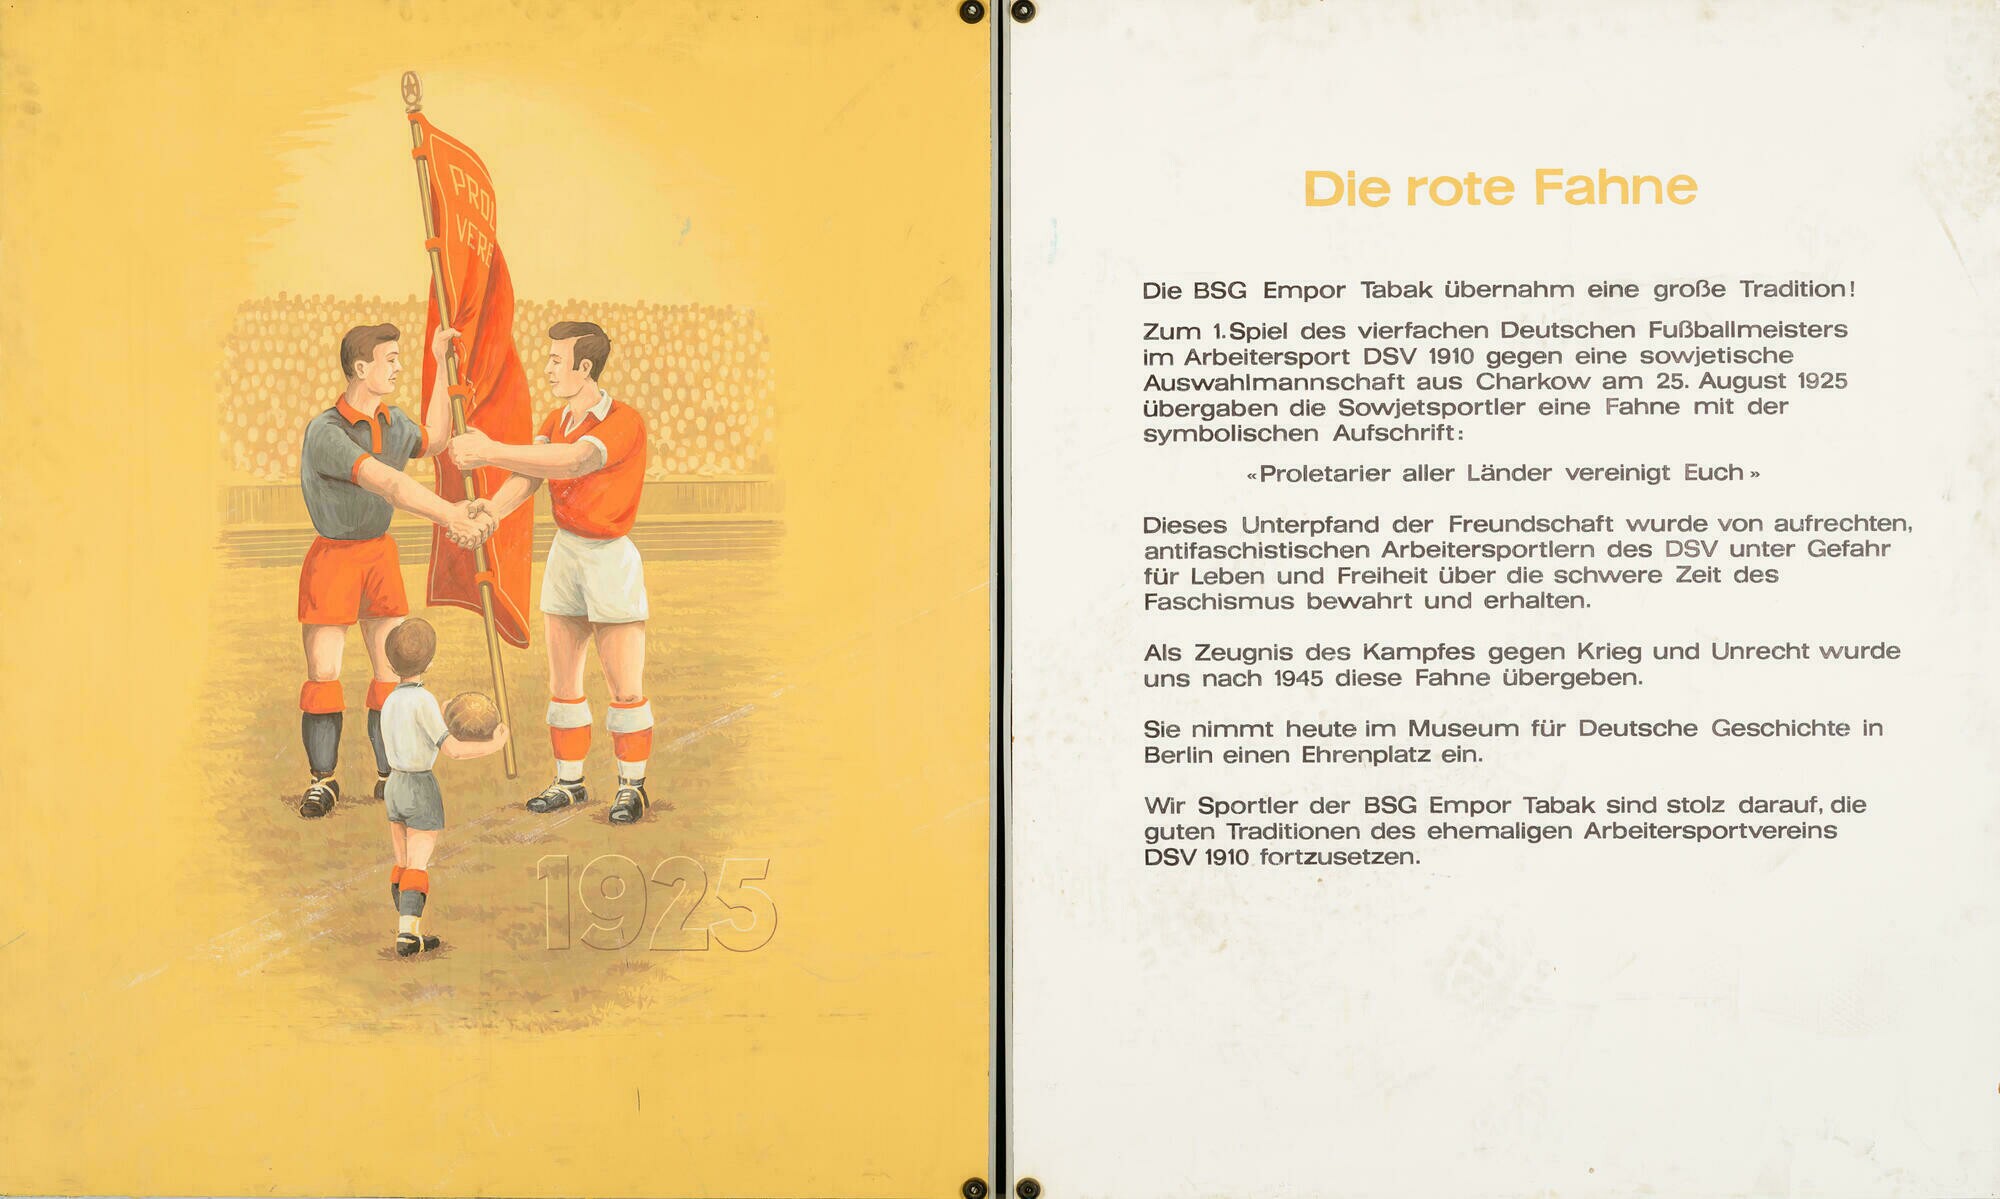 Die rote Fahne, Fußball 1925 (Stadtmuseum Dresden CC BY-NC-ND)